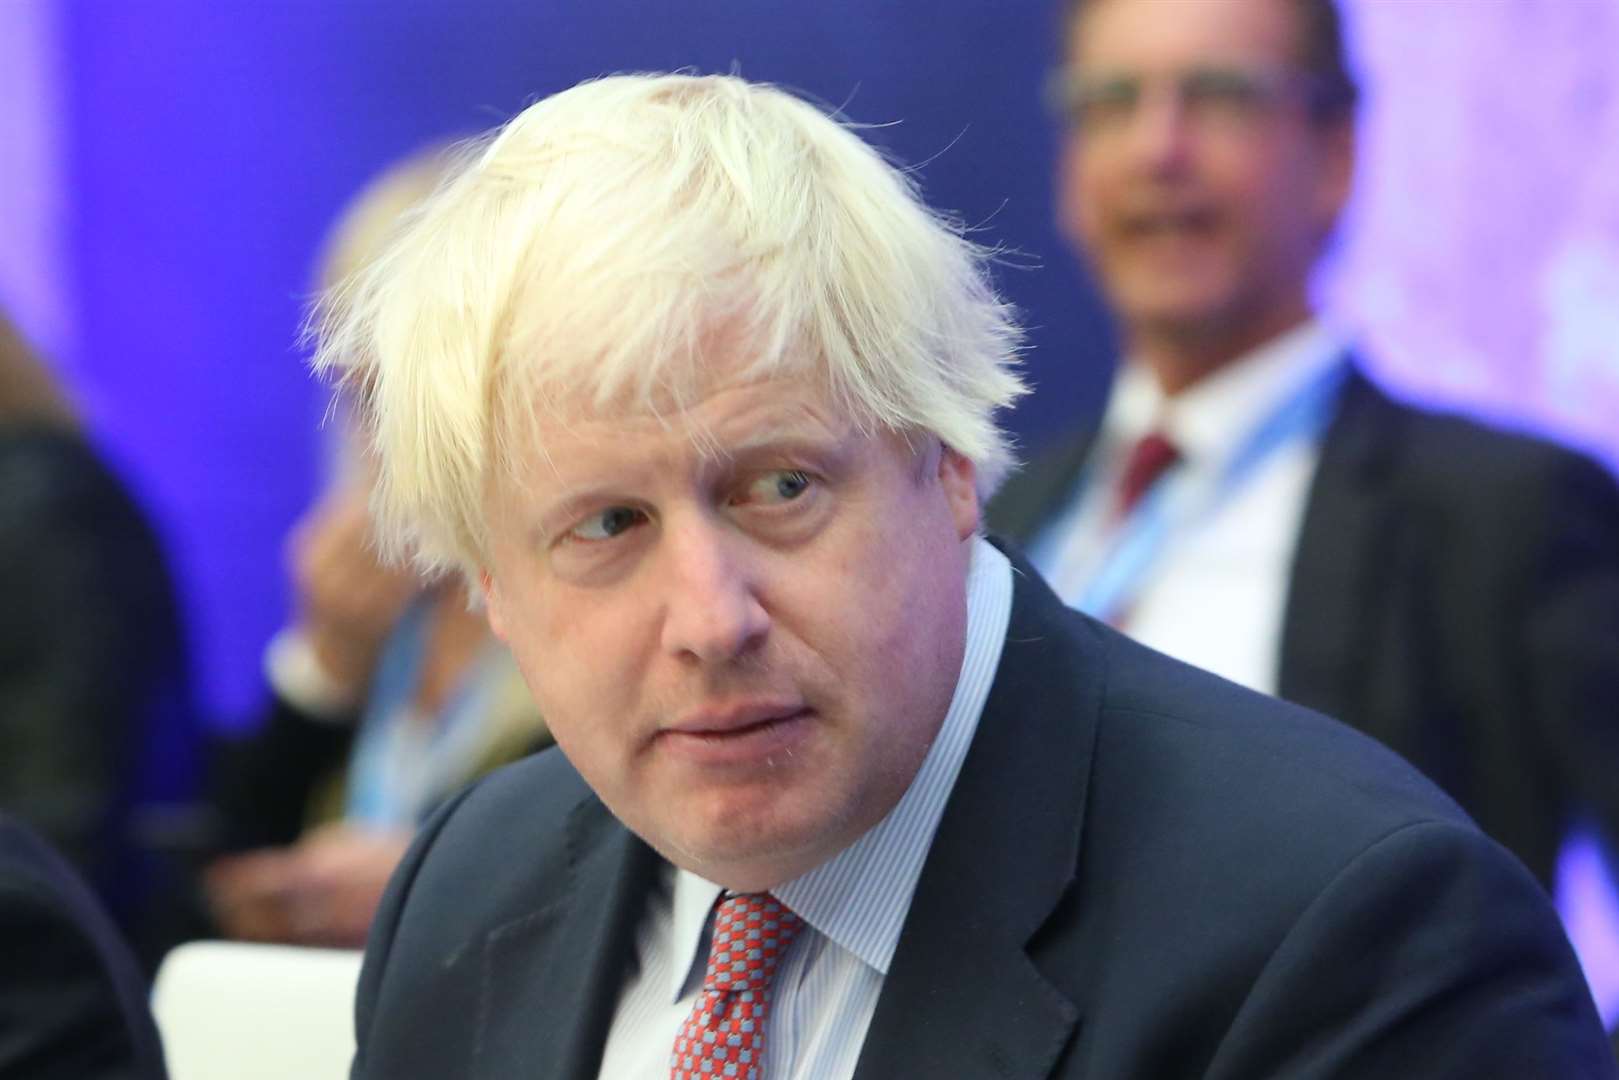 Boris Johnson is set to lift the national lockdown on December 2 - if infection rates have stabilised